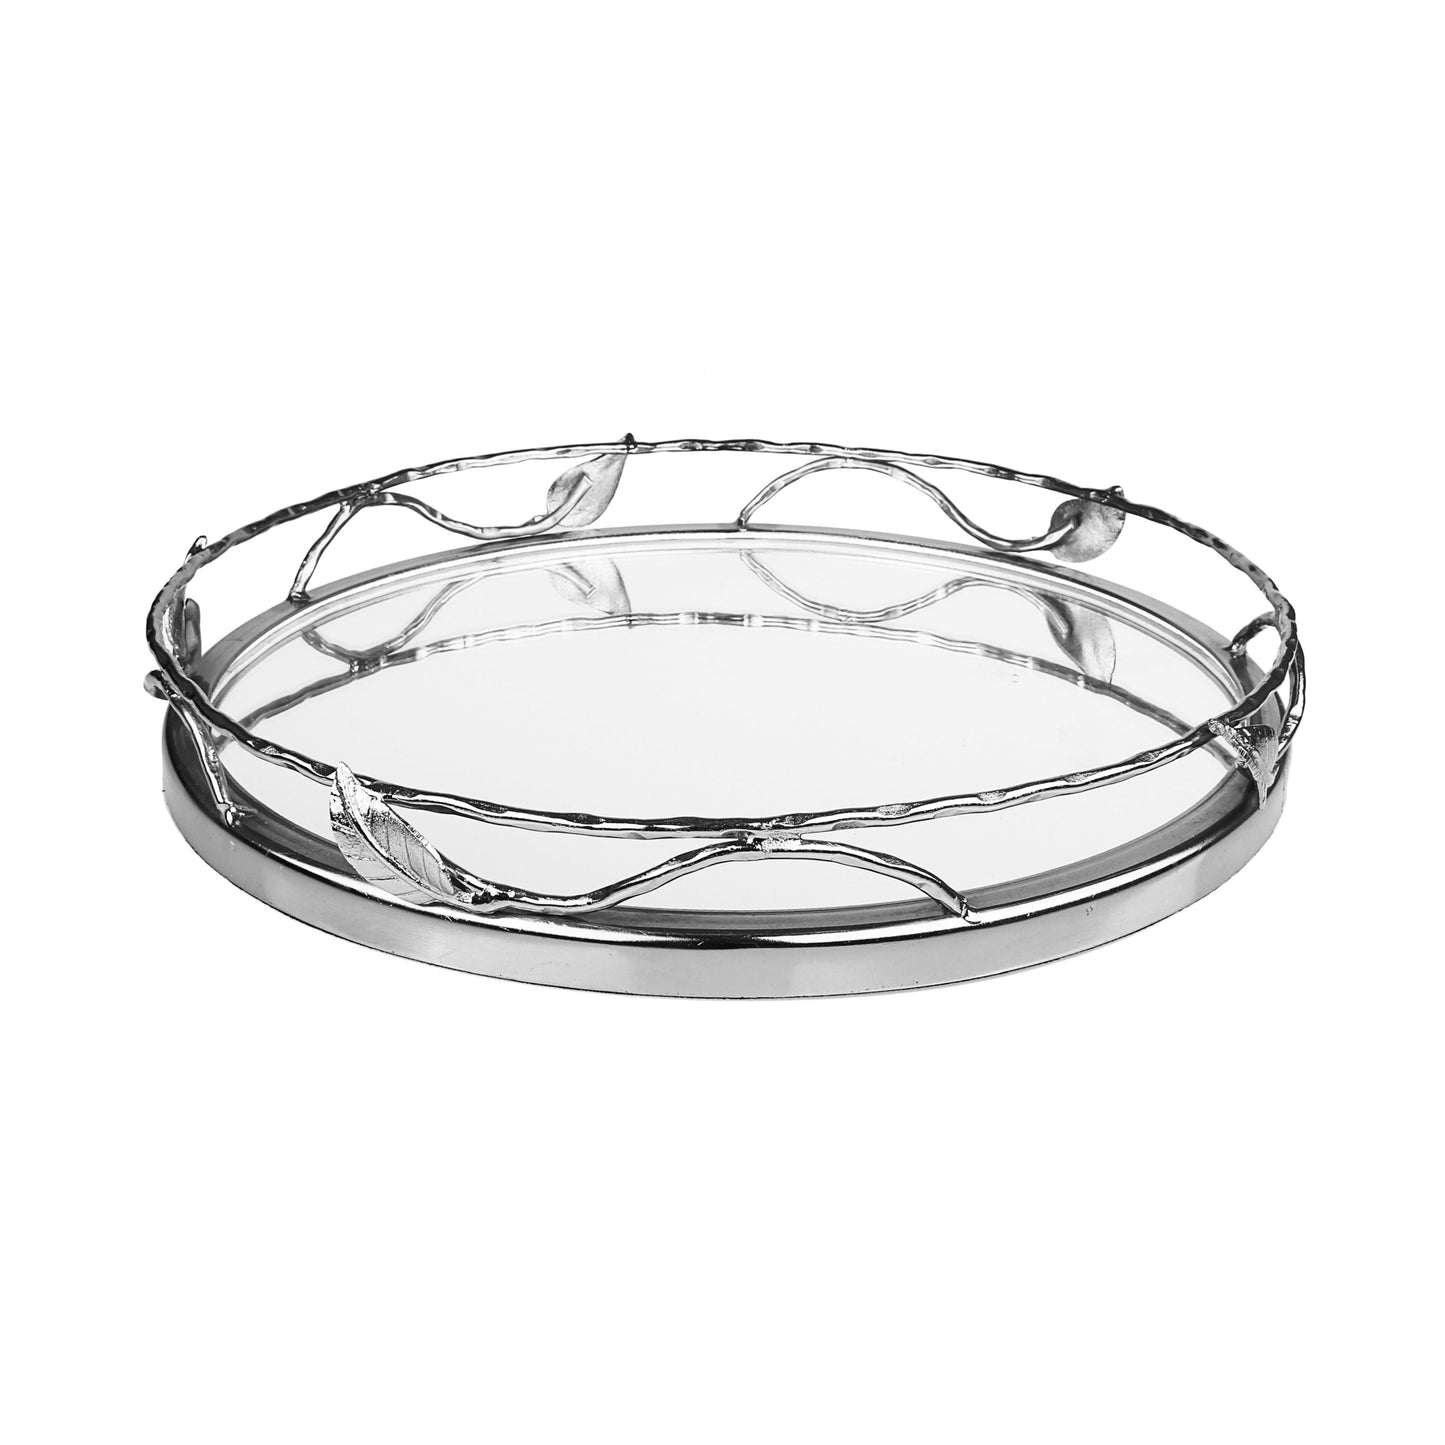 Classic Touch Decor Round Mirror Tray with Leaf Design